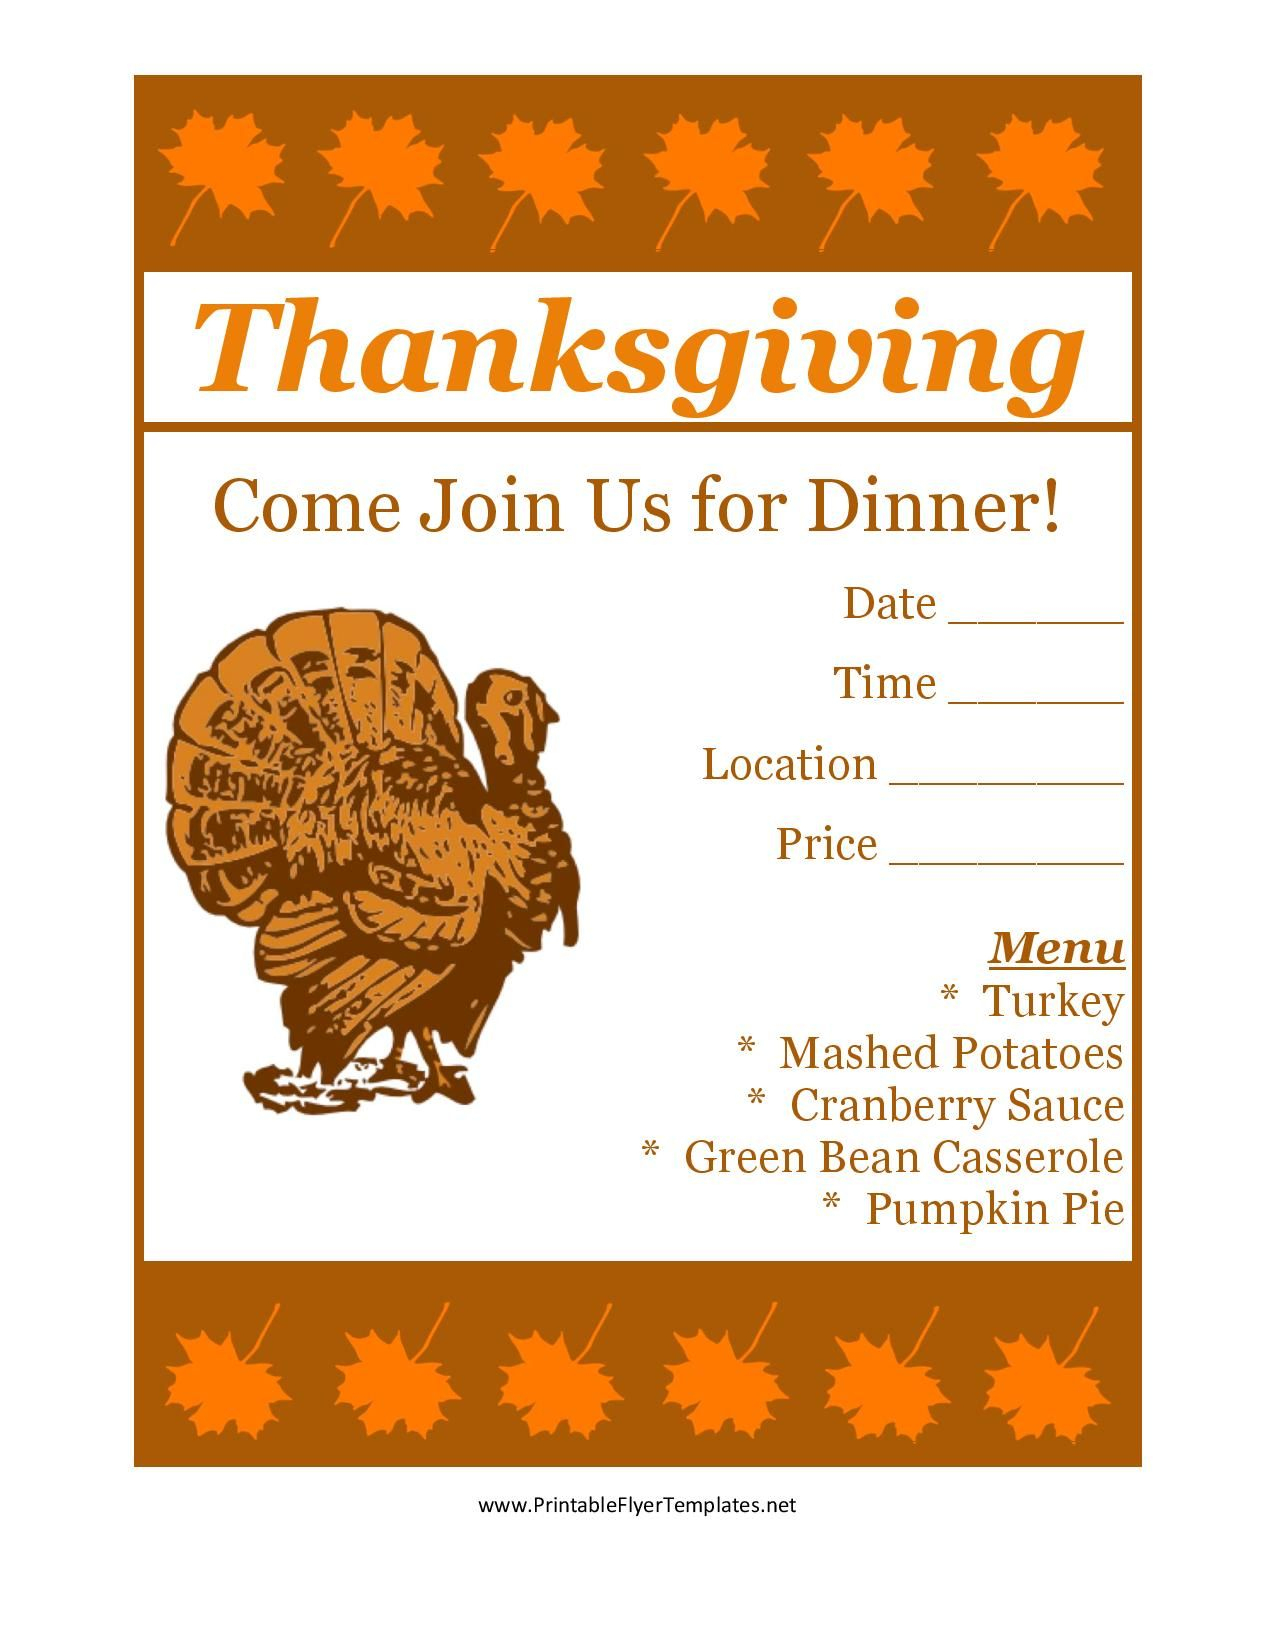 Free Printable Thanksgiving Flyer Invintation Template | Holiday&amp;#039;s - Free Printable Flyers